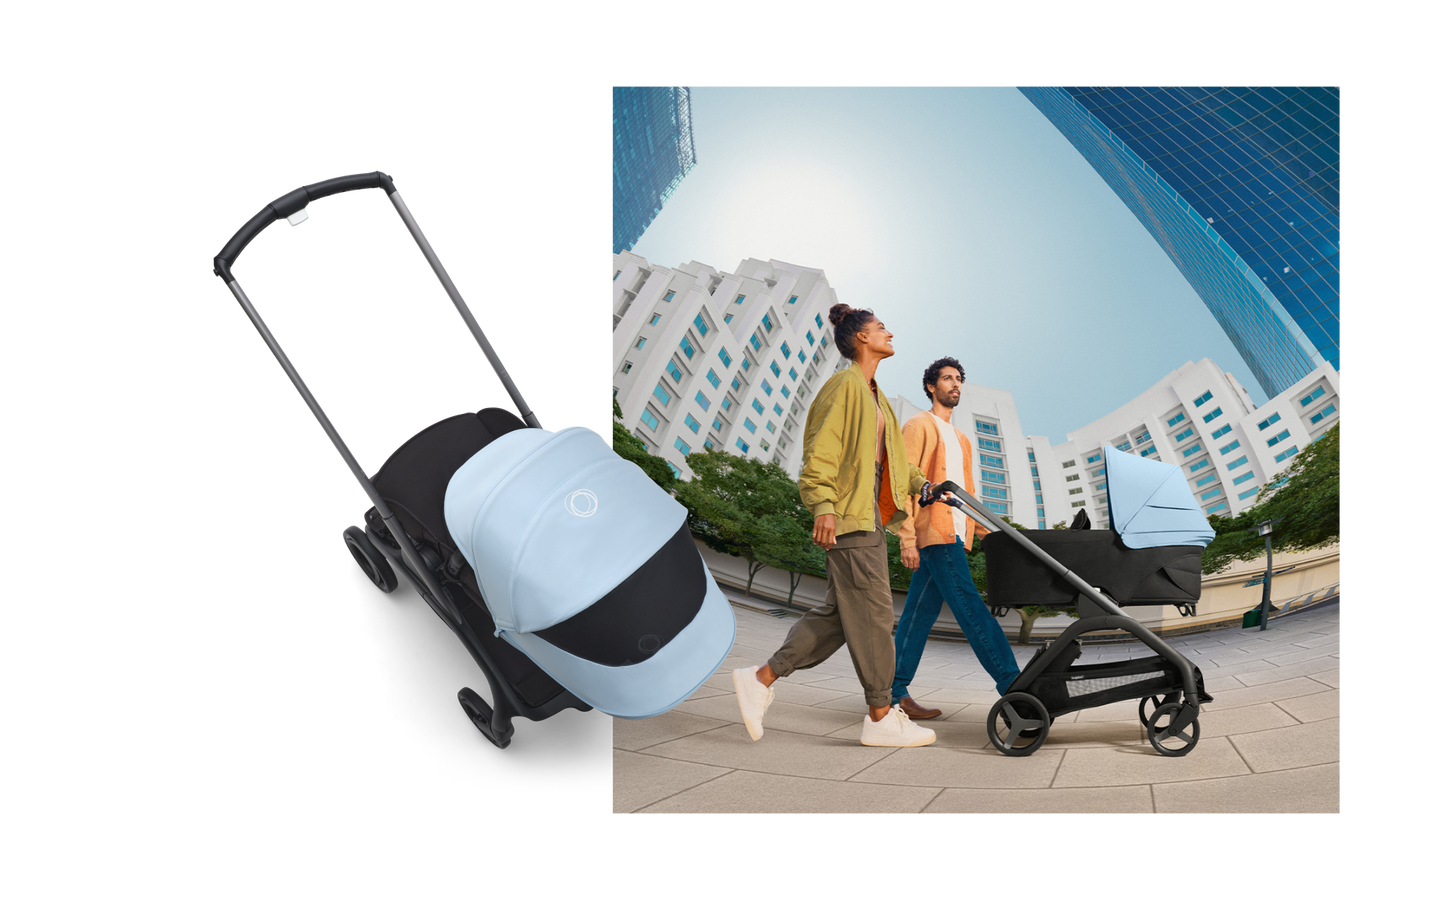 Two overlapping images; one is of parents leisurely strolling through the city with their Bugaboo Dragonfly stroller, the other is a top-down view of the Bugaboo Dragonfly.